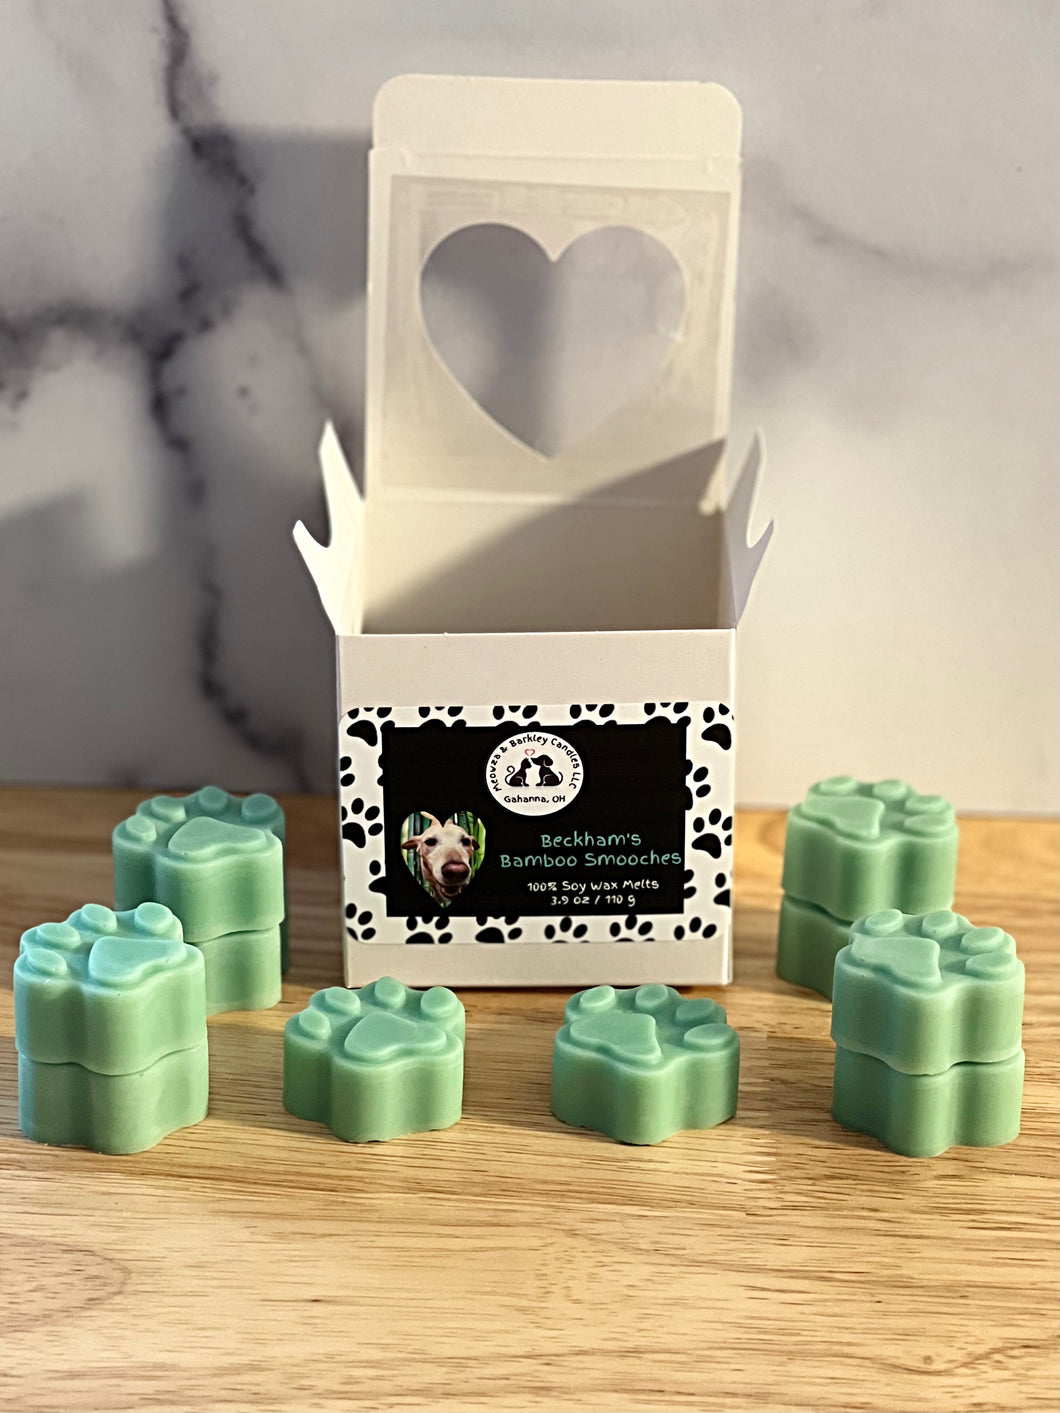 Beckham's Bamboo Smooches - Set of 10 Paw Print Soy Wax Melts - Fresh Bamboo Scent